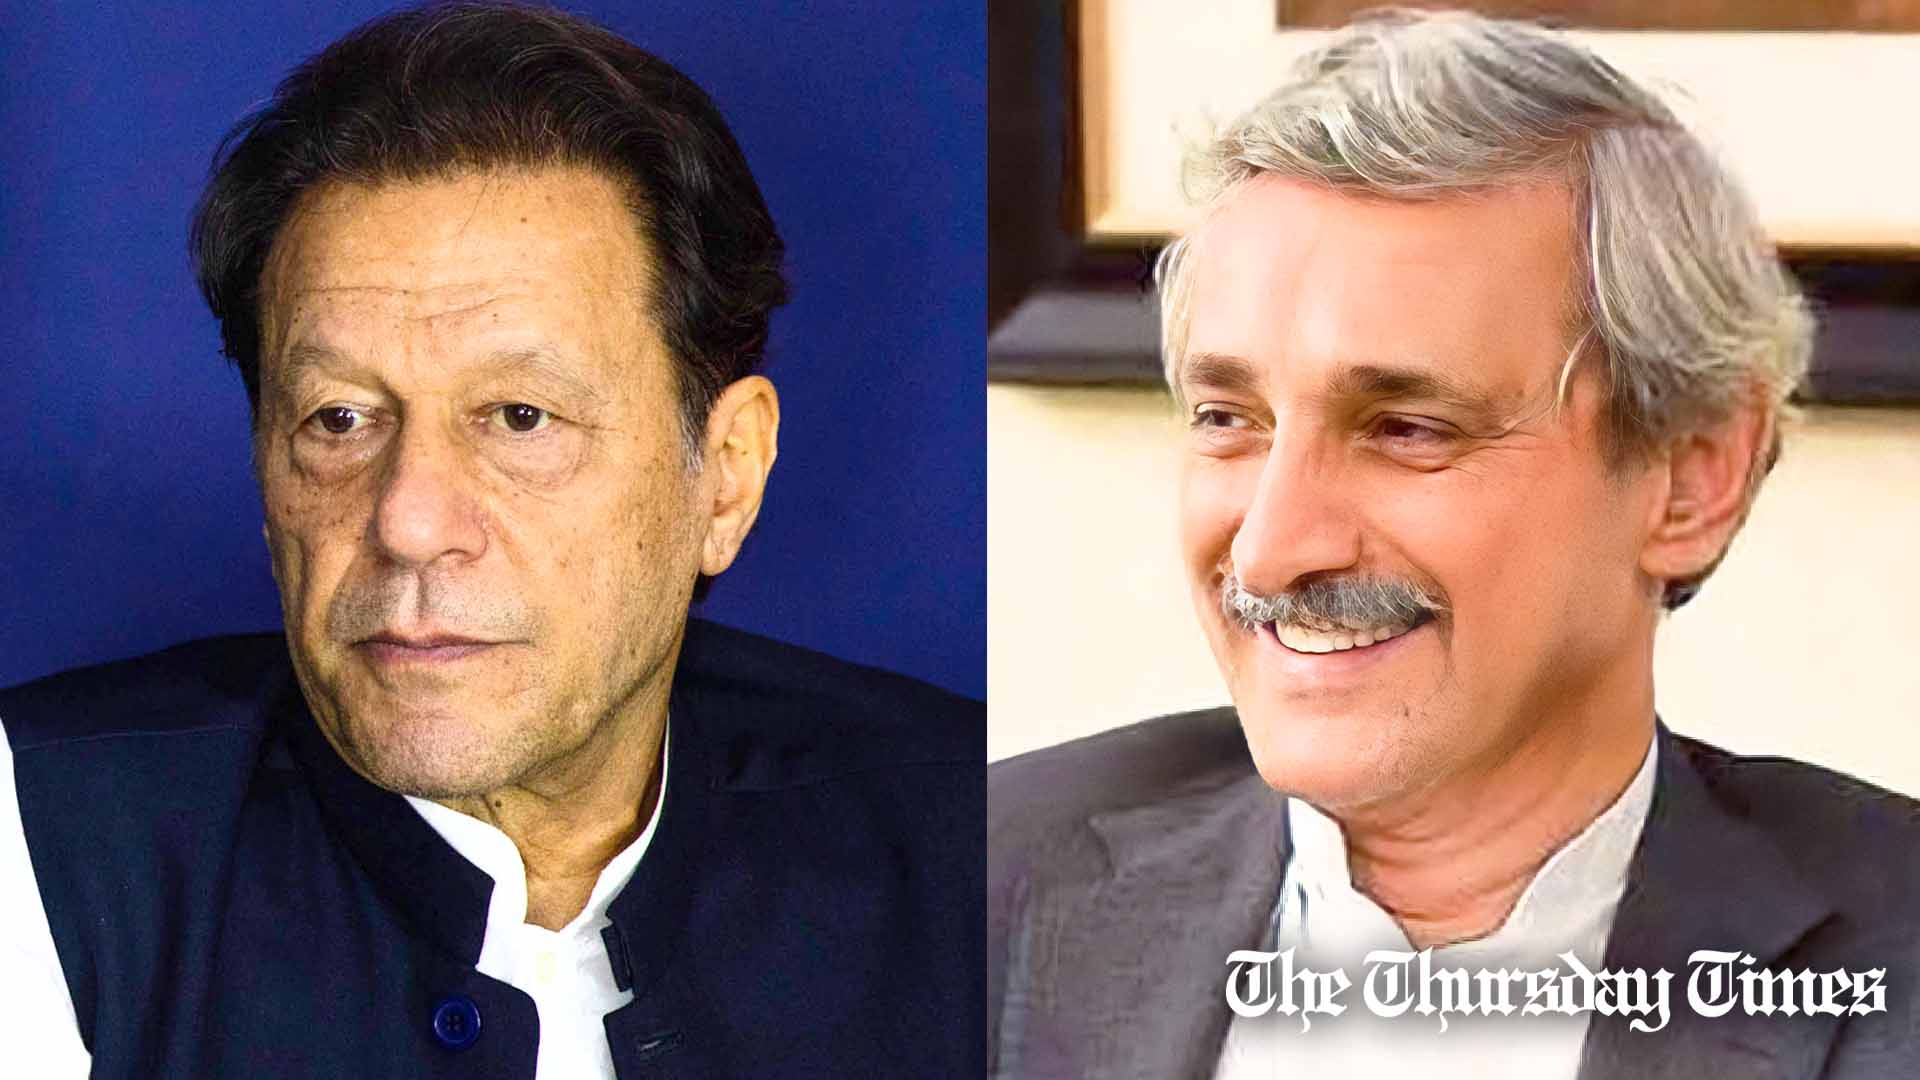 A combined file photo is shown of PTI chairman Imran Khan (L) and IPP chief Jahangir Tareen. — FILE/THE THURSDAY TIMES